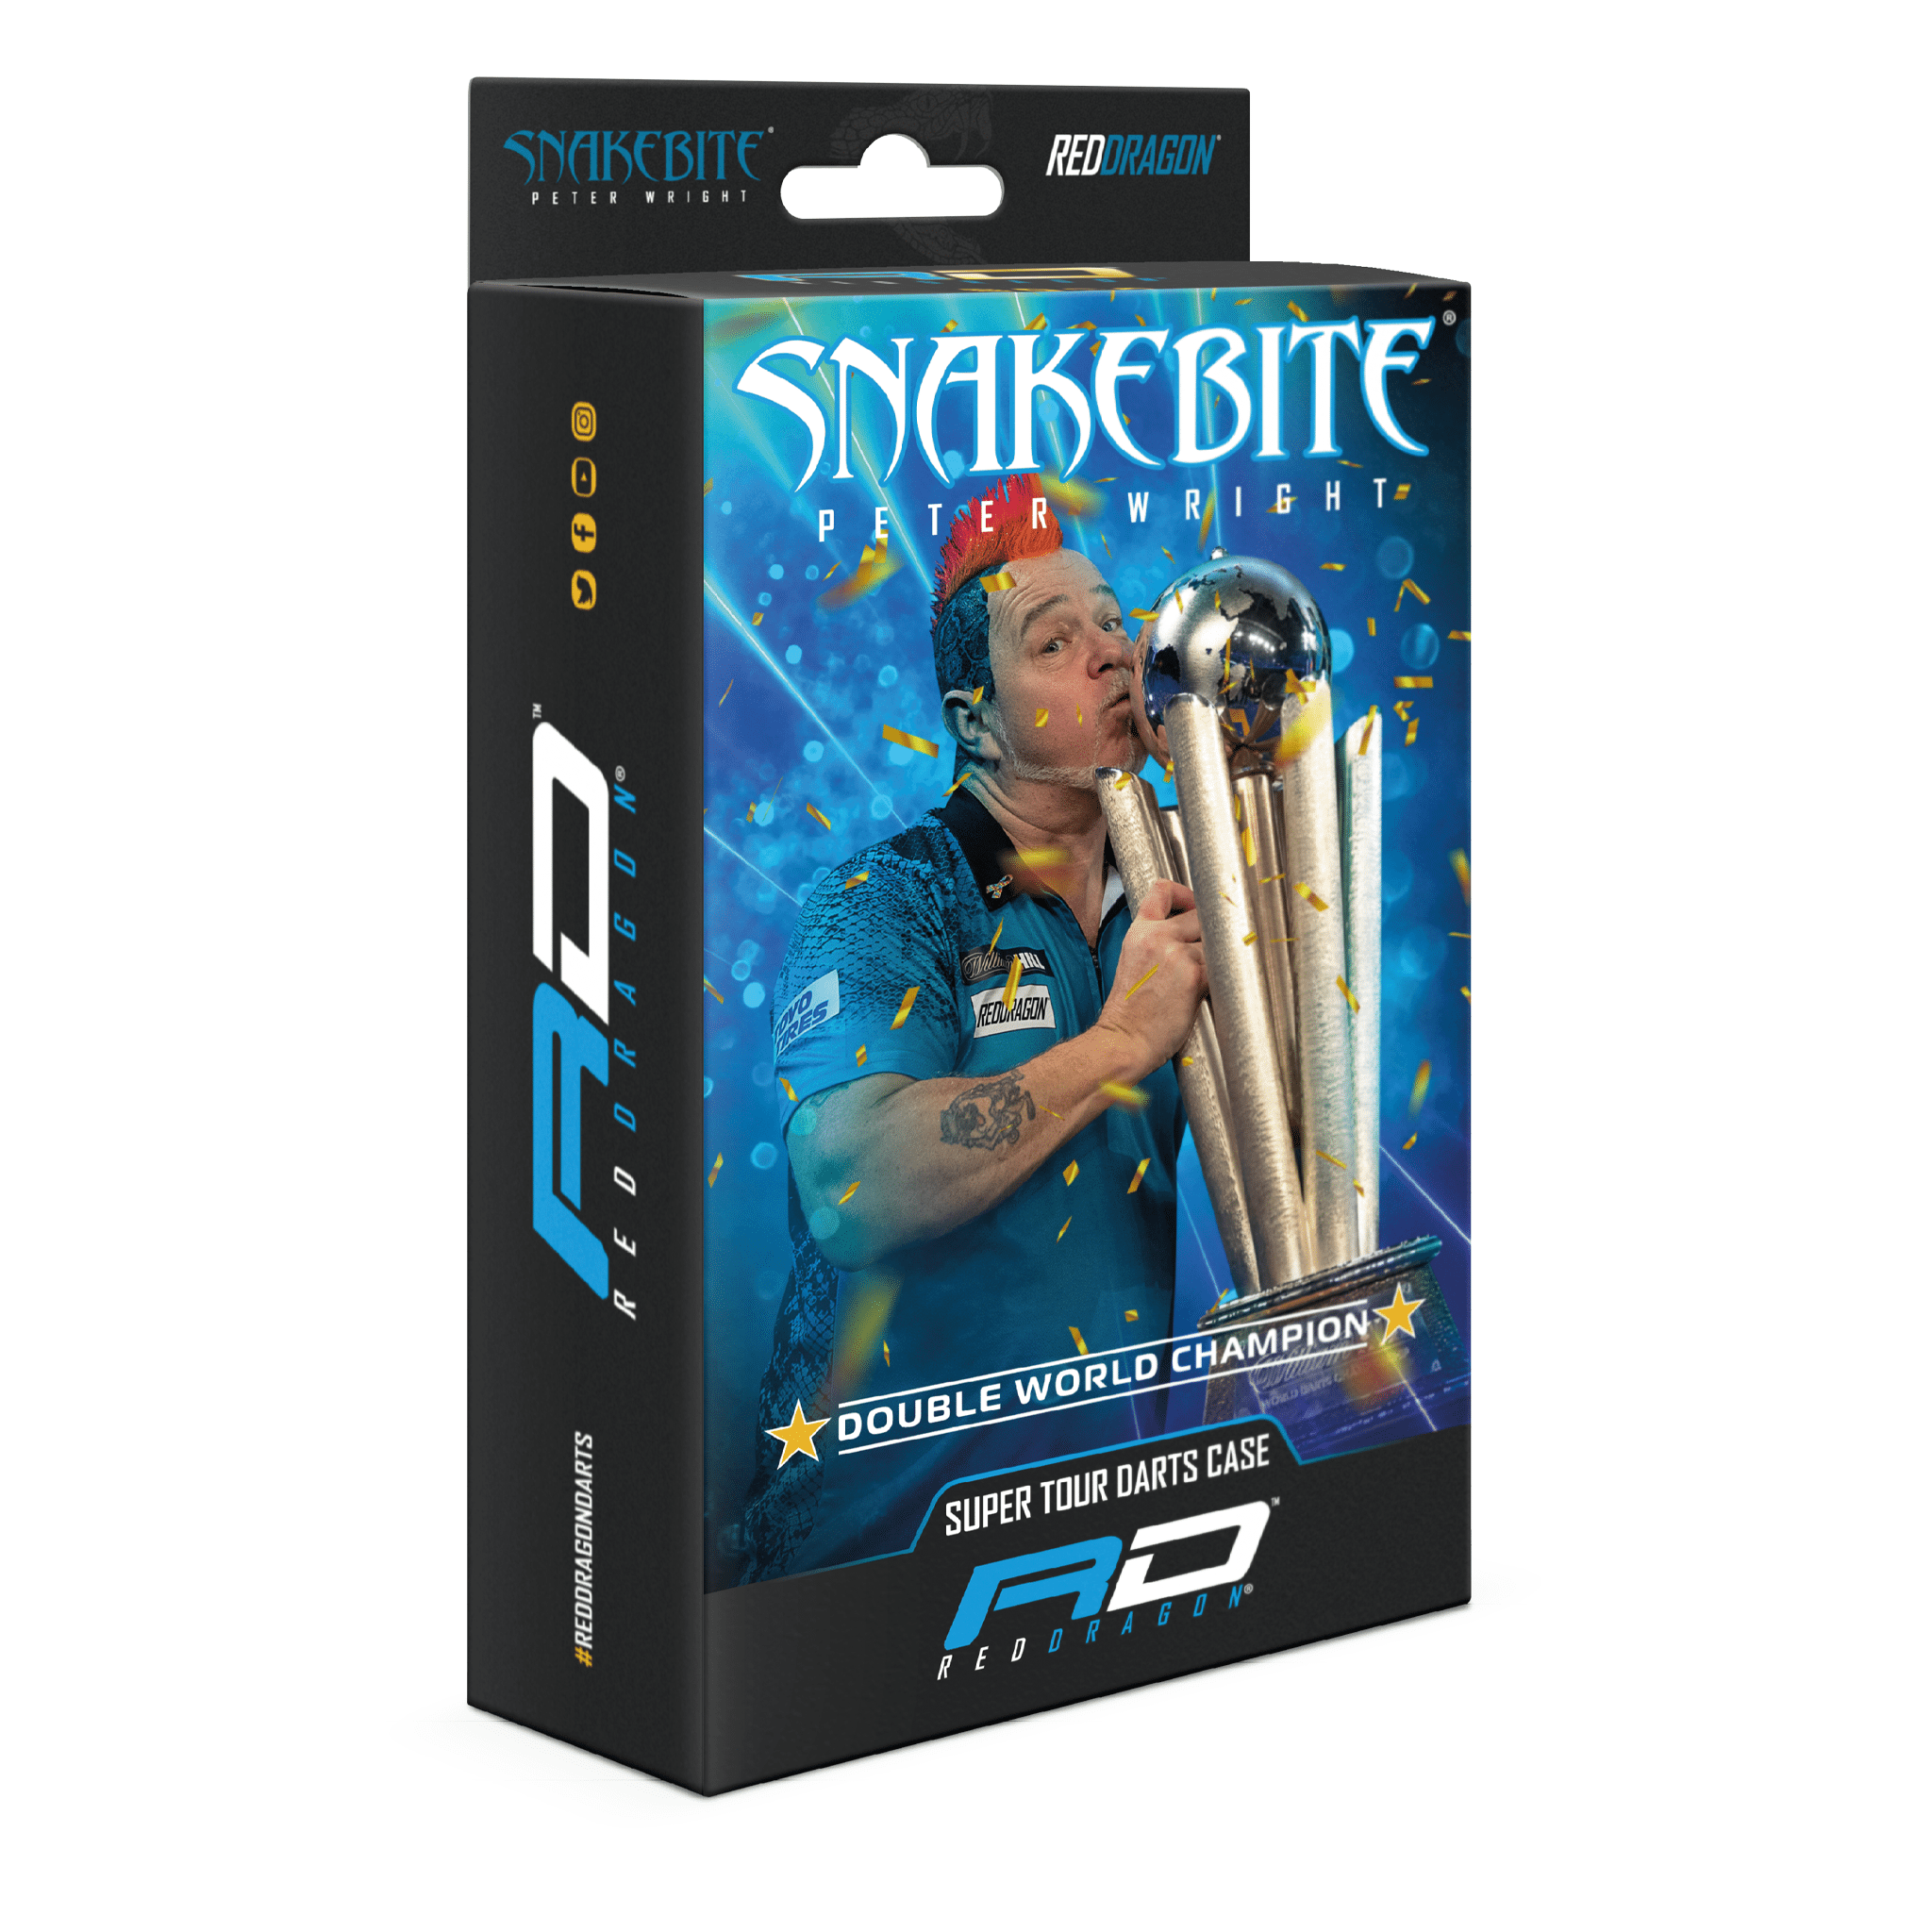 Red Dragon Peter Wright Double World Champion - Super Tour Darts Case Black & Blue Cases